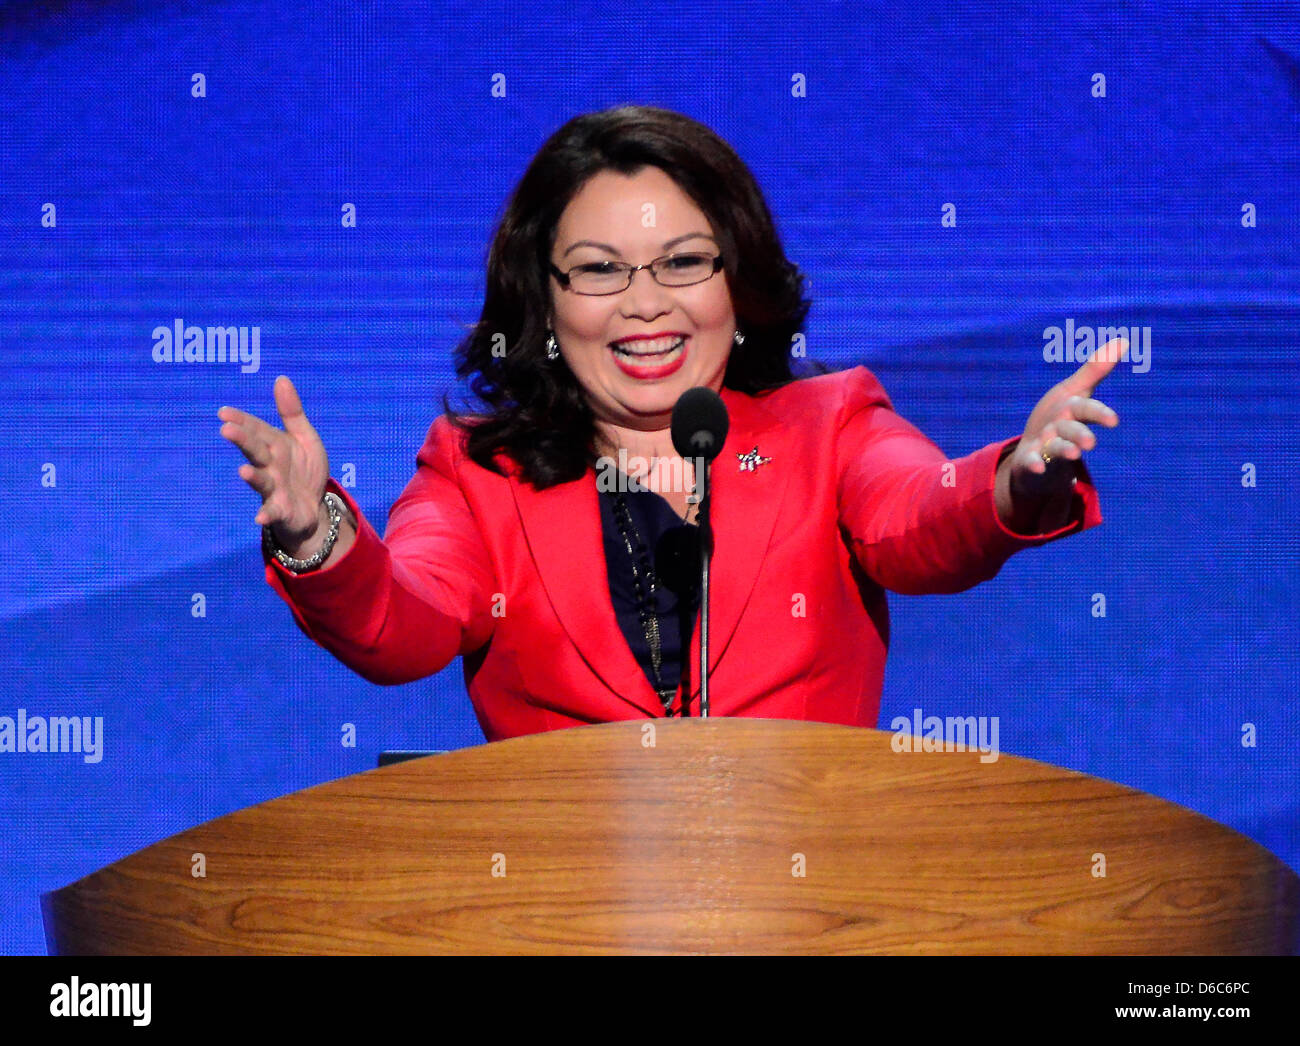 Tammy Duckworth, former Assistant Secretary of the United States Department of Veterans Affairs and candidate for the U.S. House of Representatives from Illinois, makes remarks at the 2012 Democratic National Convention in Charlotte, North Carolina on Tuesday, September 4, 2012. .Credit: Ron Sachs / CNP.(RESTRICTION: NO New York or New Jersey Newspapers or newspapers within a 75 mi Stock Photo